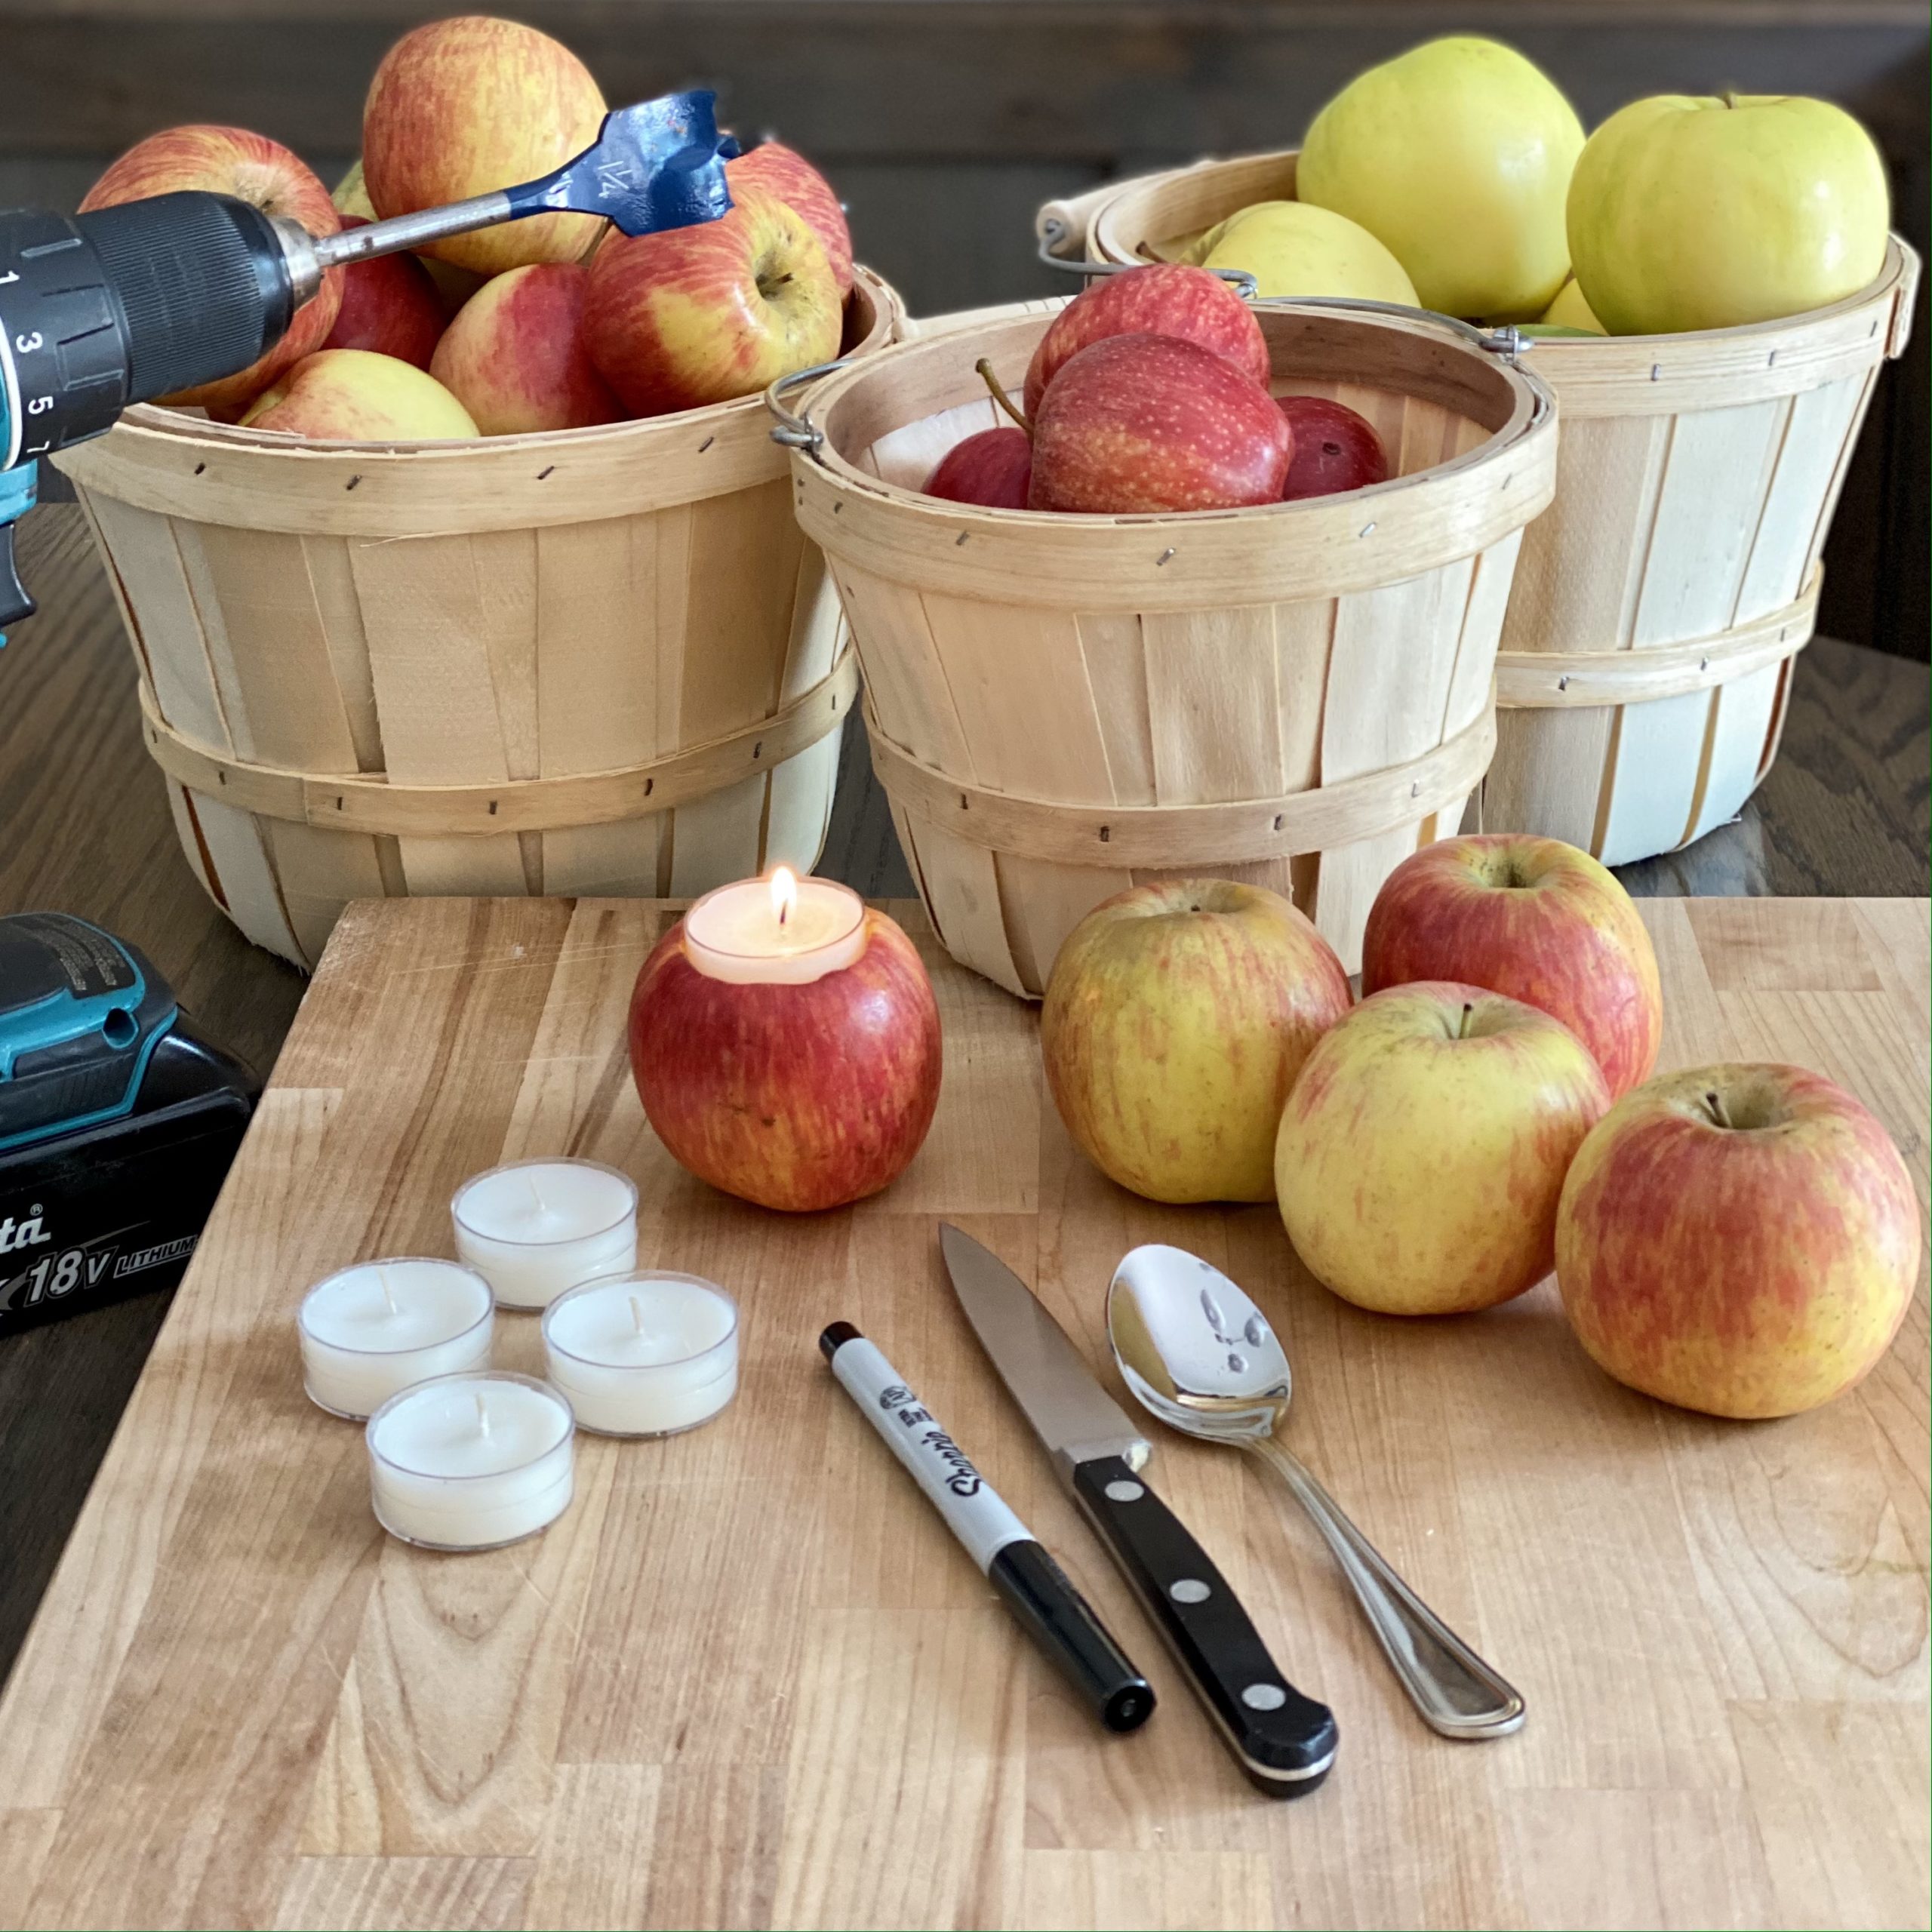 Orchard baskets filled with apples in the background. In the foreground is everything needed to make apple votives including apples, votive candles, a paring knife, spoon, Sharpie, and a drill with a spade bit on it.